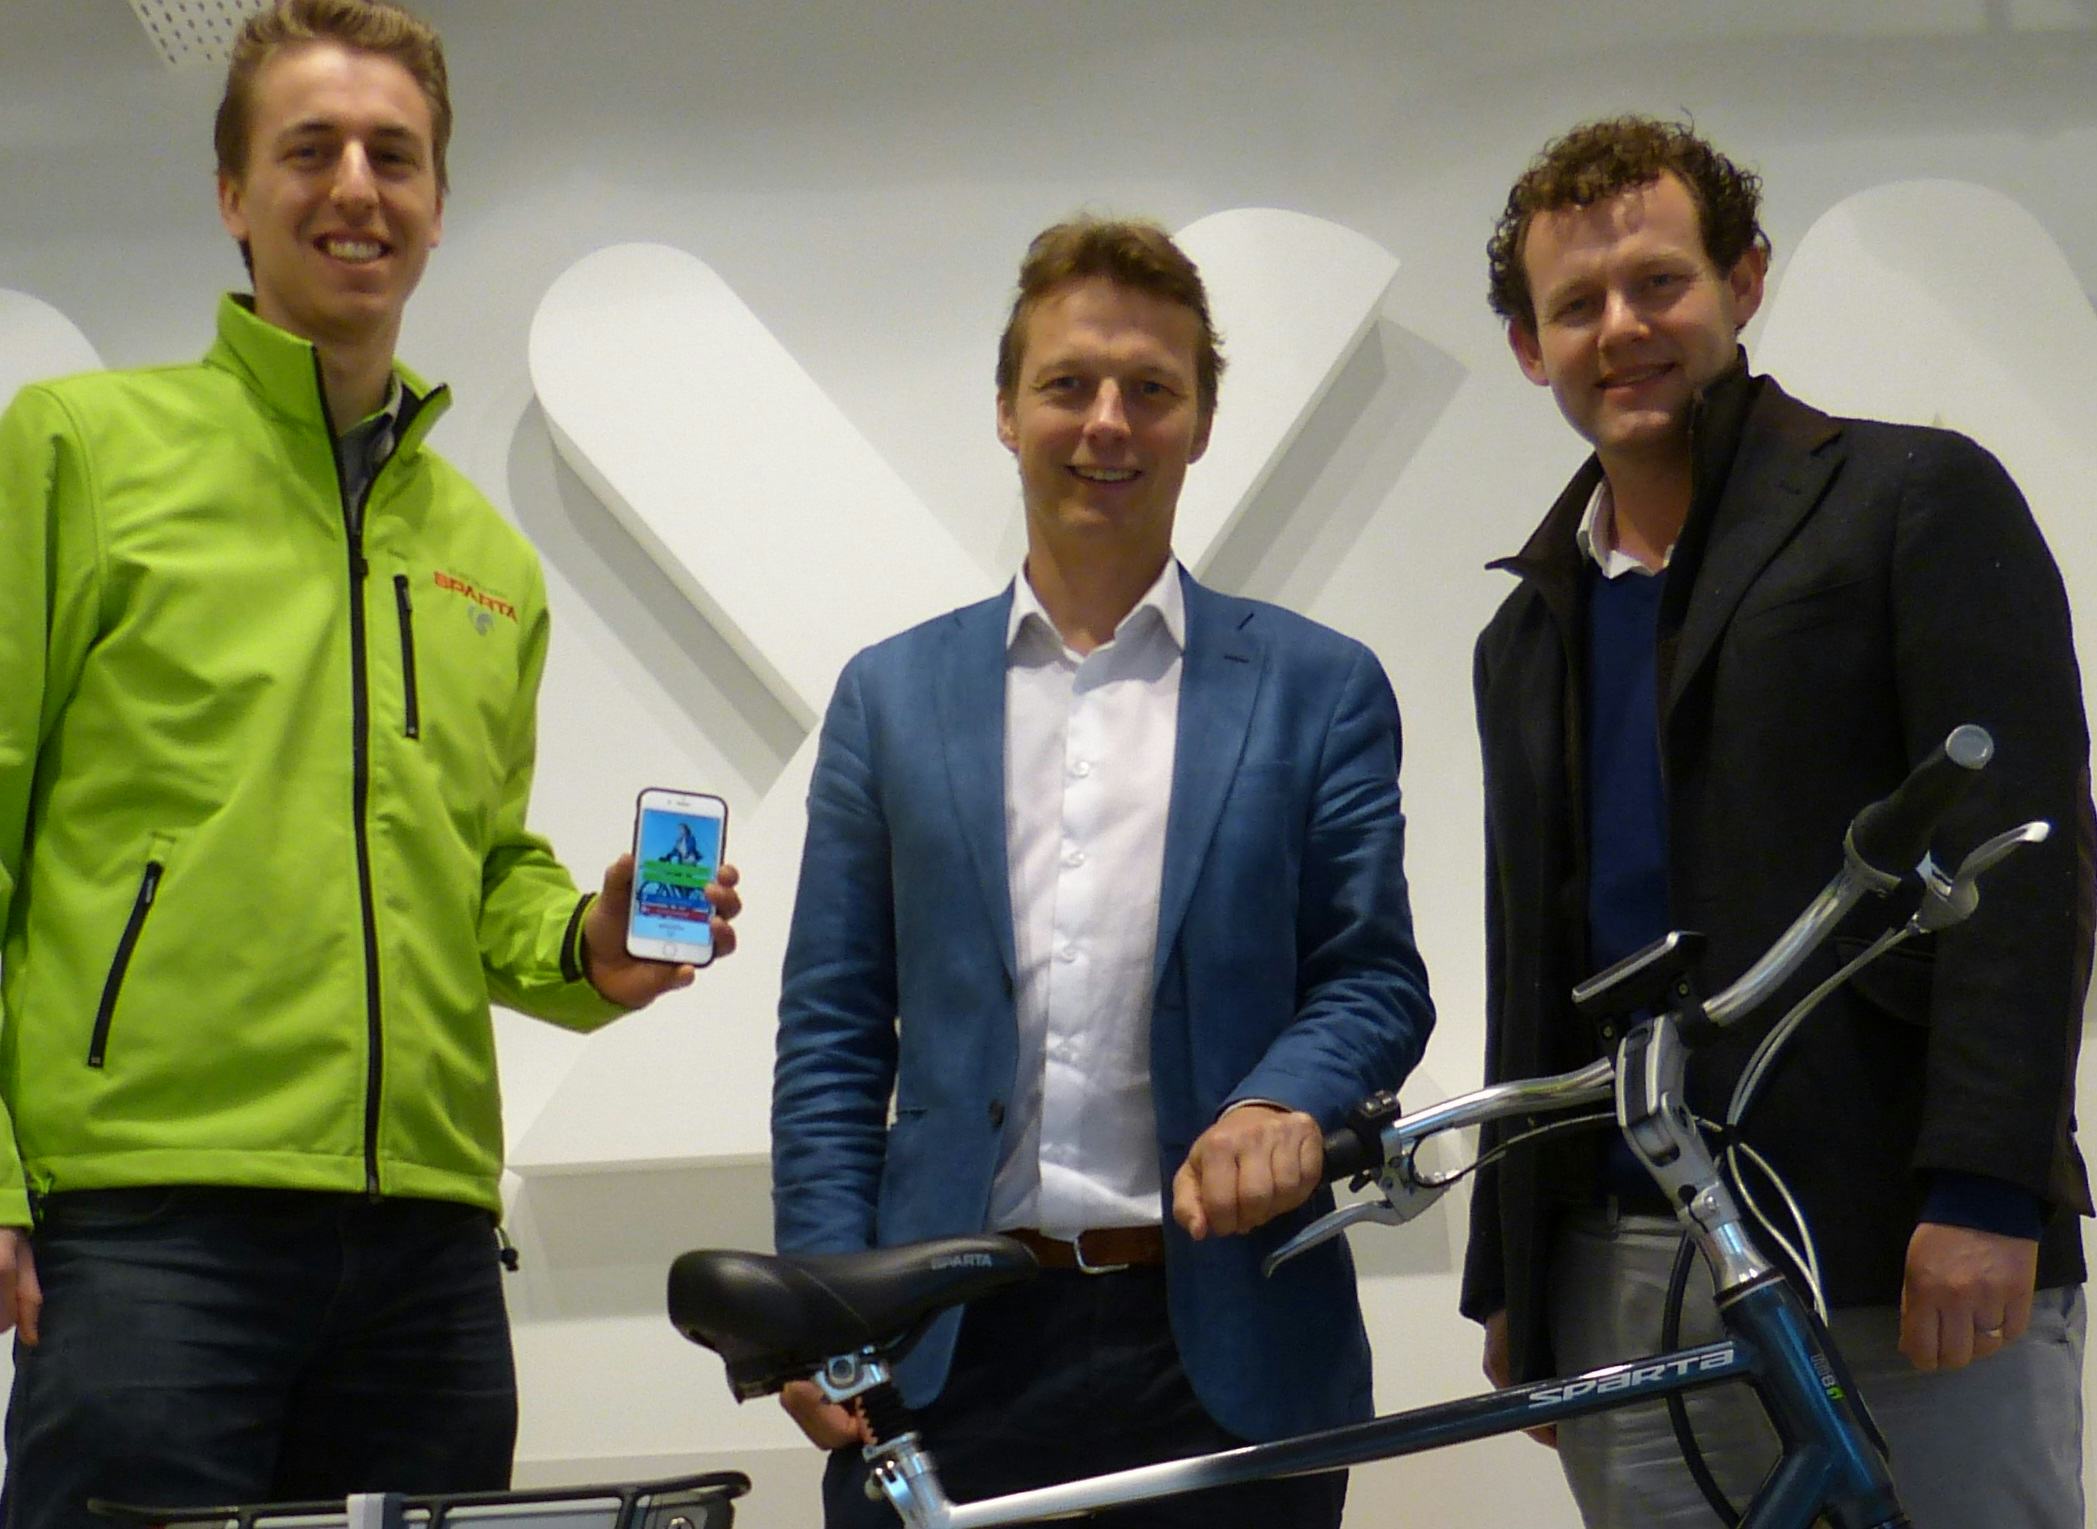 Bart Visser, Conneqtech, Harmen Treep, MD AXA Bike Security, and Chiel Prein, Assortment Manager Sparta (left to right) with App and Sparta M8i ltd connected. – Photo Bike Europe